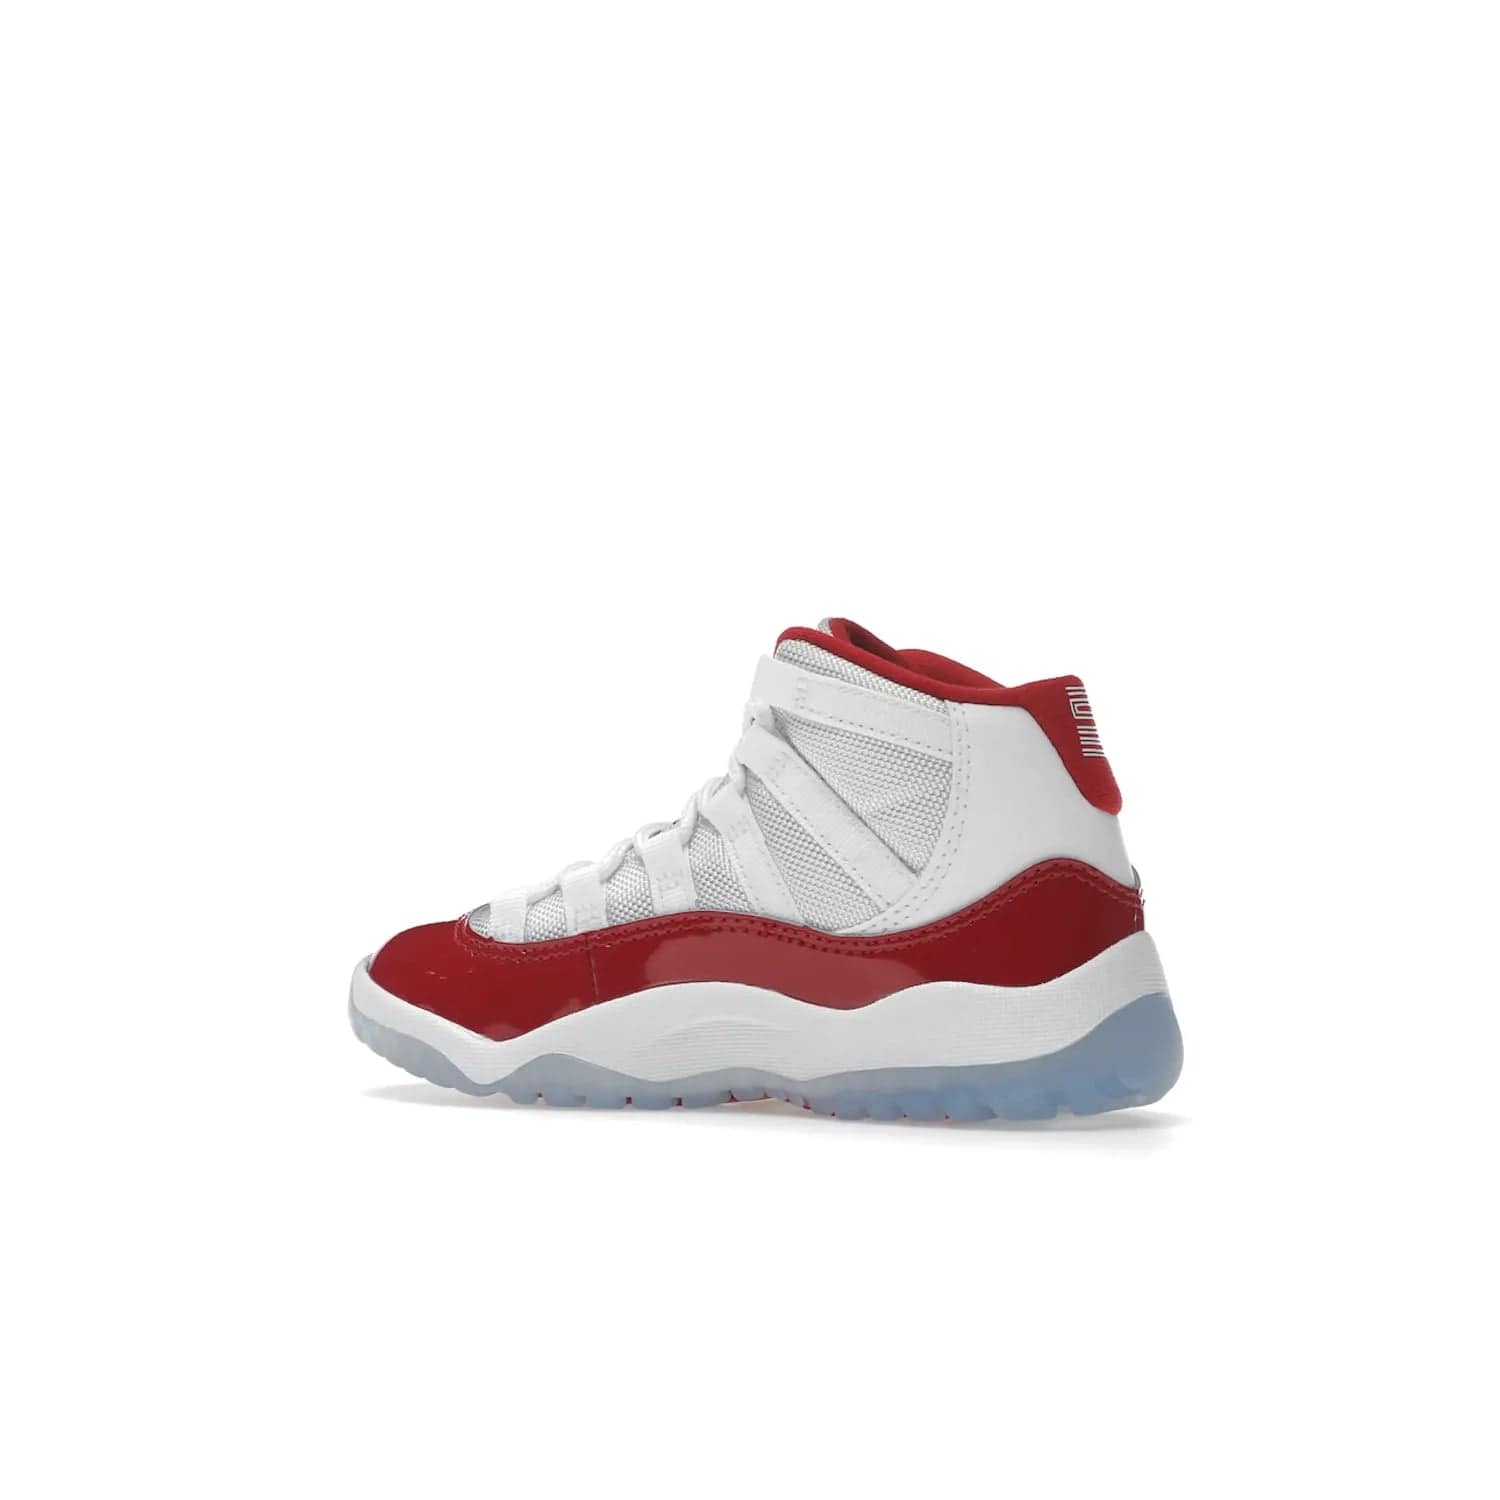 Jordan 11 Retro Cherry (2022) (PS) - Image 22 - Only at www.BallersClubKickz.com - An iconic silhouette with a timeless look, the Air Jordan 11 Retro Cherry 2022 PS features a crisp White, Varsity Red and Black colorway. The upper is made of ballistic mesh, a red patent leather mudguard, '23' branding and white Phylon midsole. Get optimal cushioning and comfort on December 10th, 2022. Don't miss out.